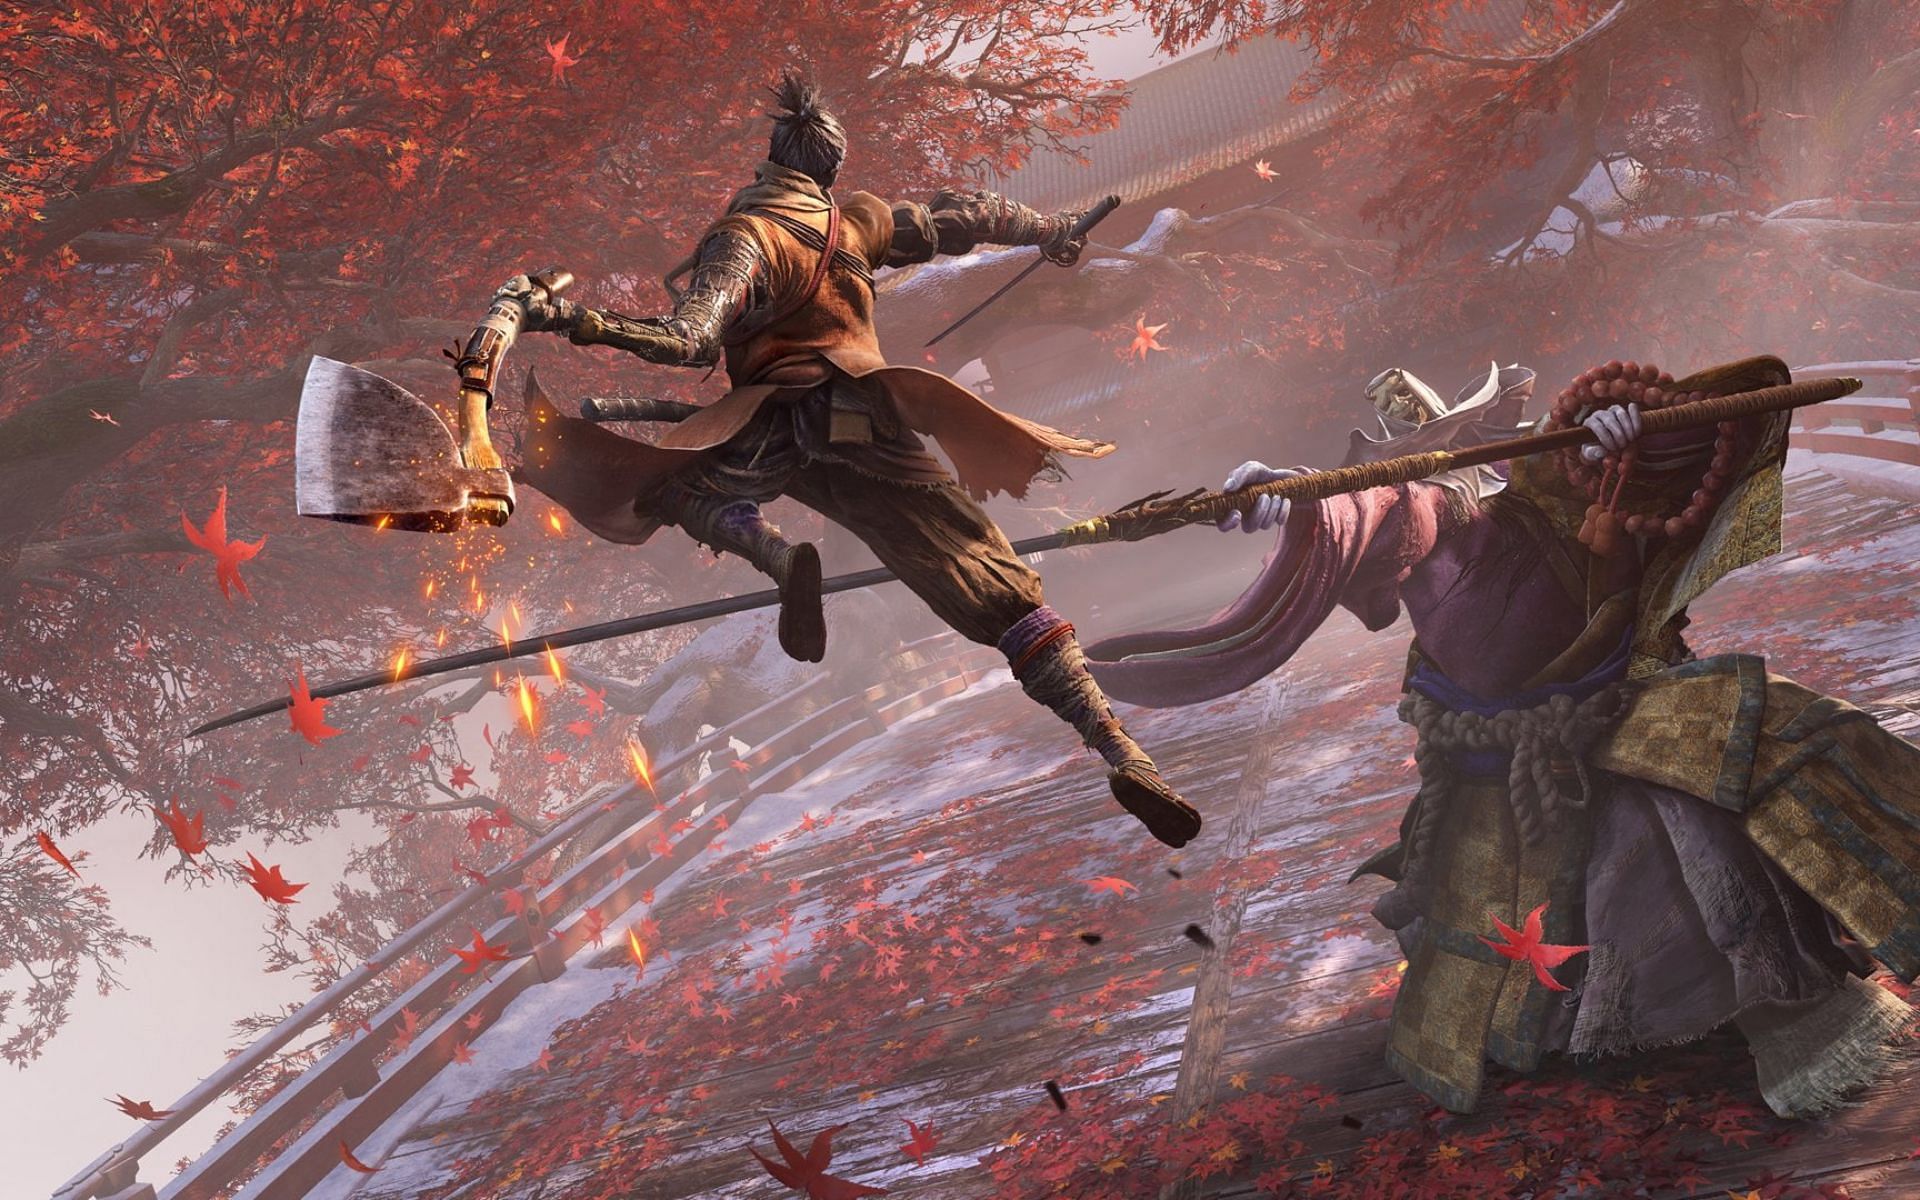 A scene from Sekiro: Shadows Die Twice (Image via Activision)